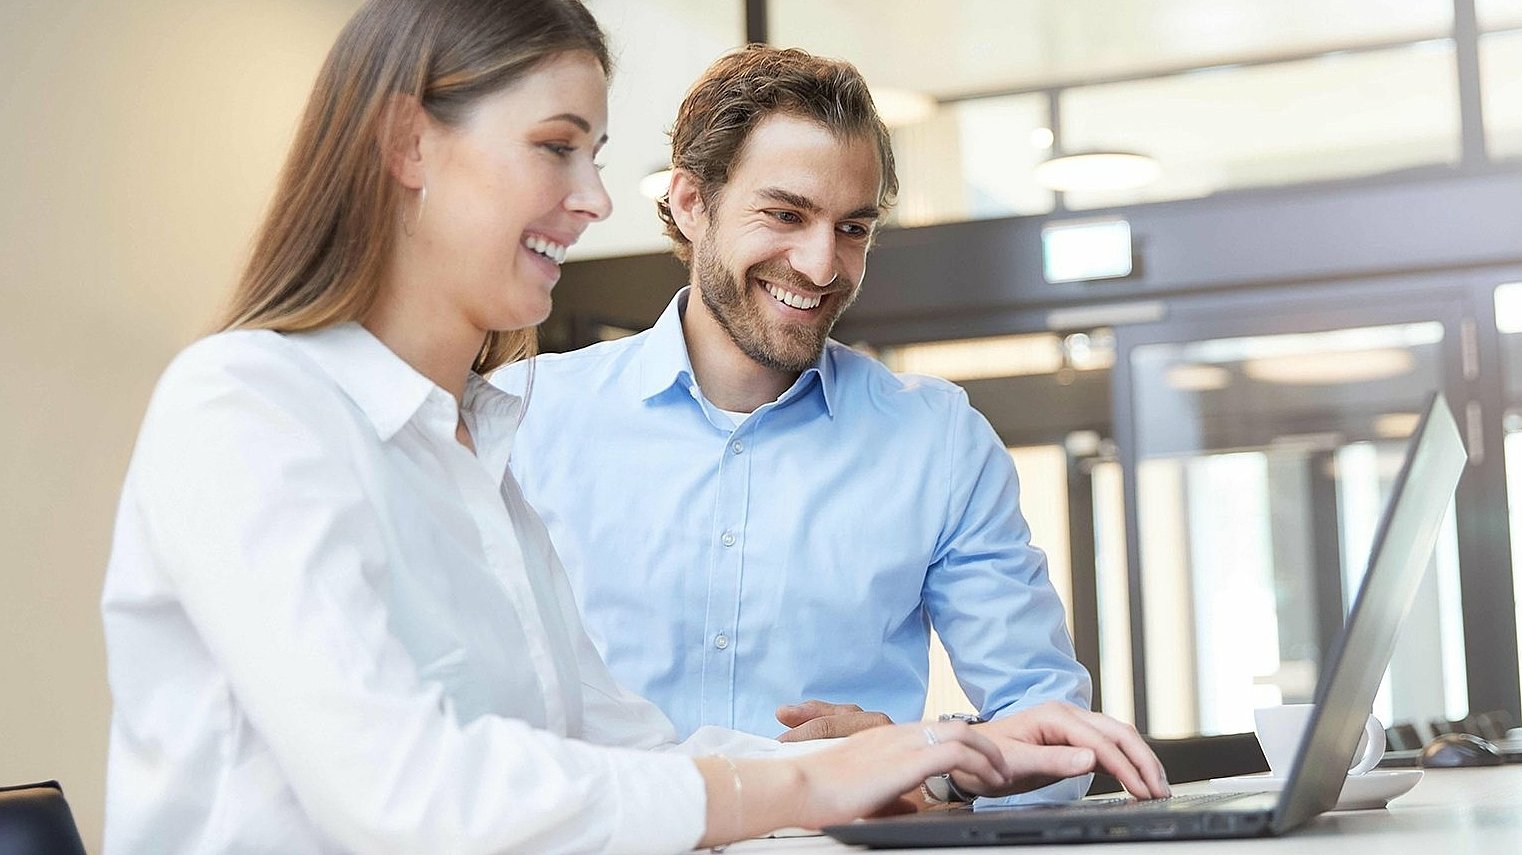 Woman and man reviewing regulatory support documents on laptop